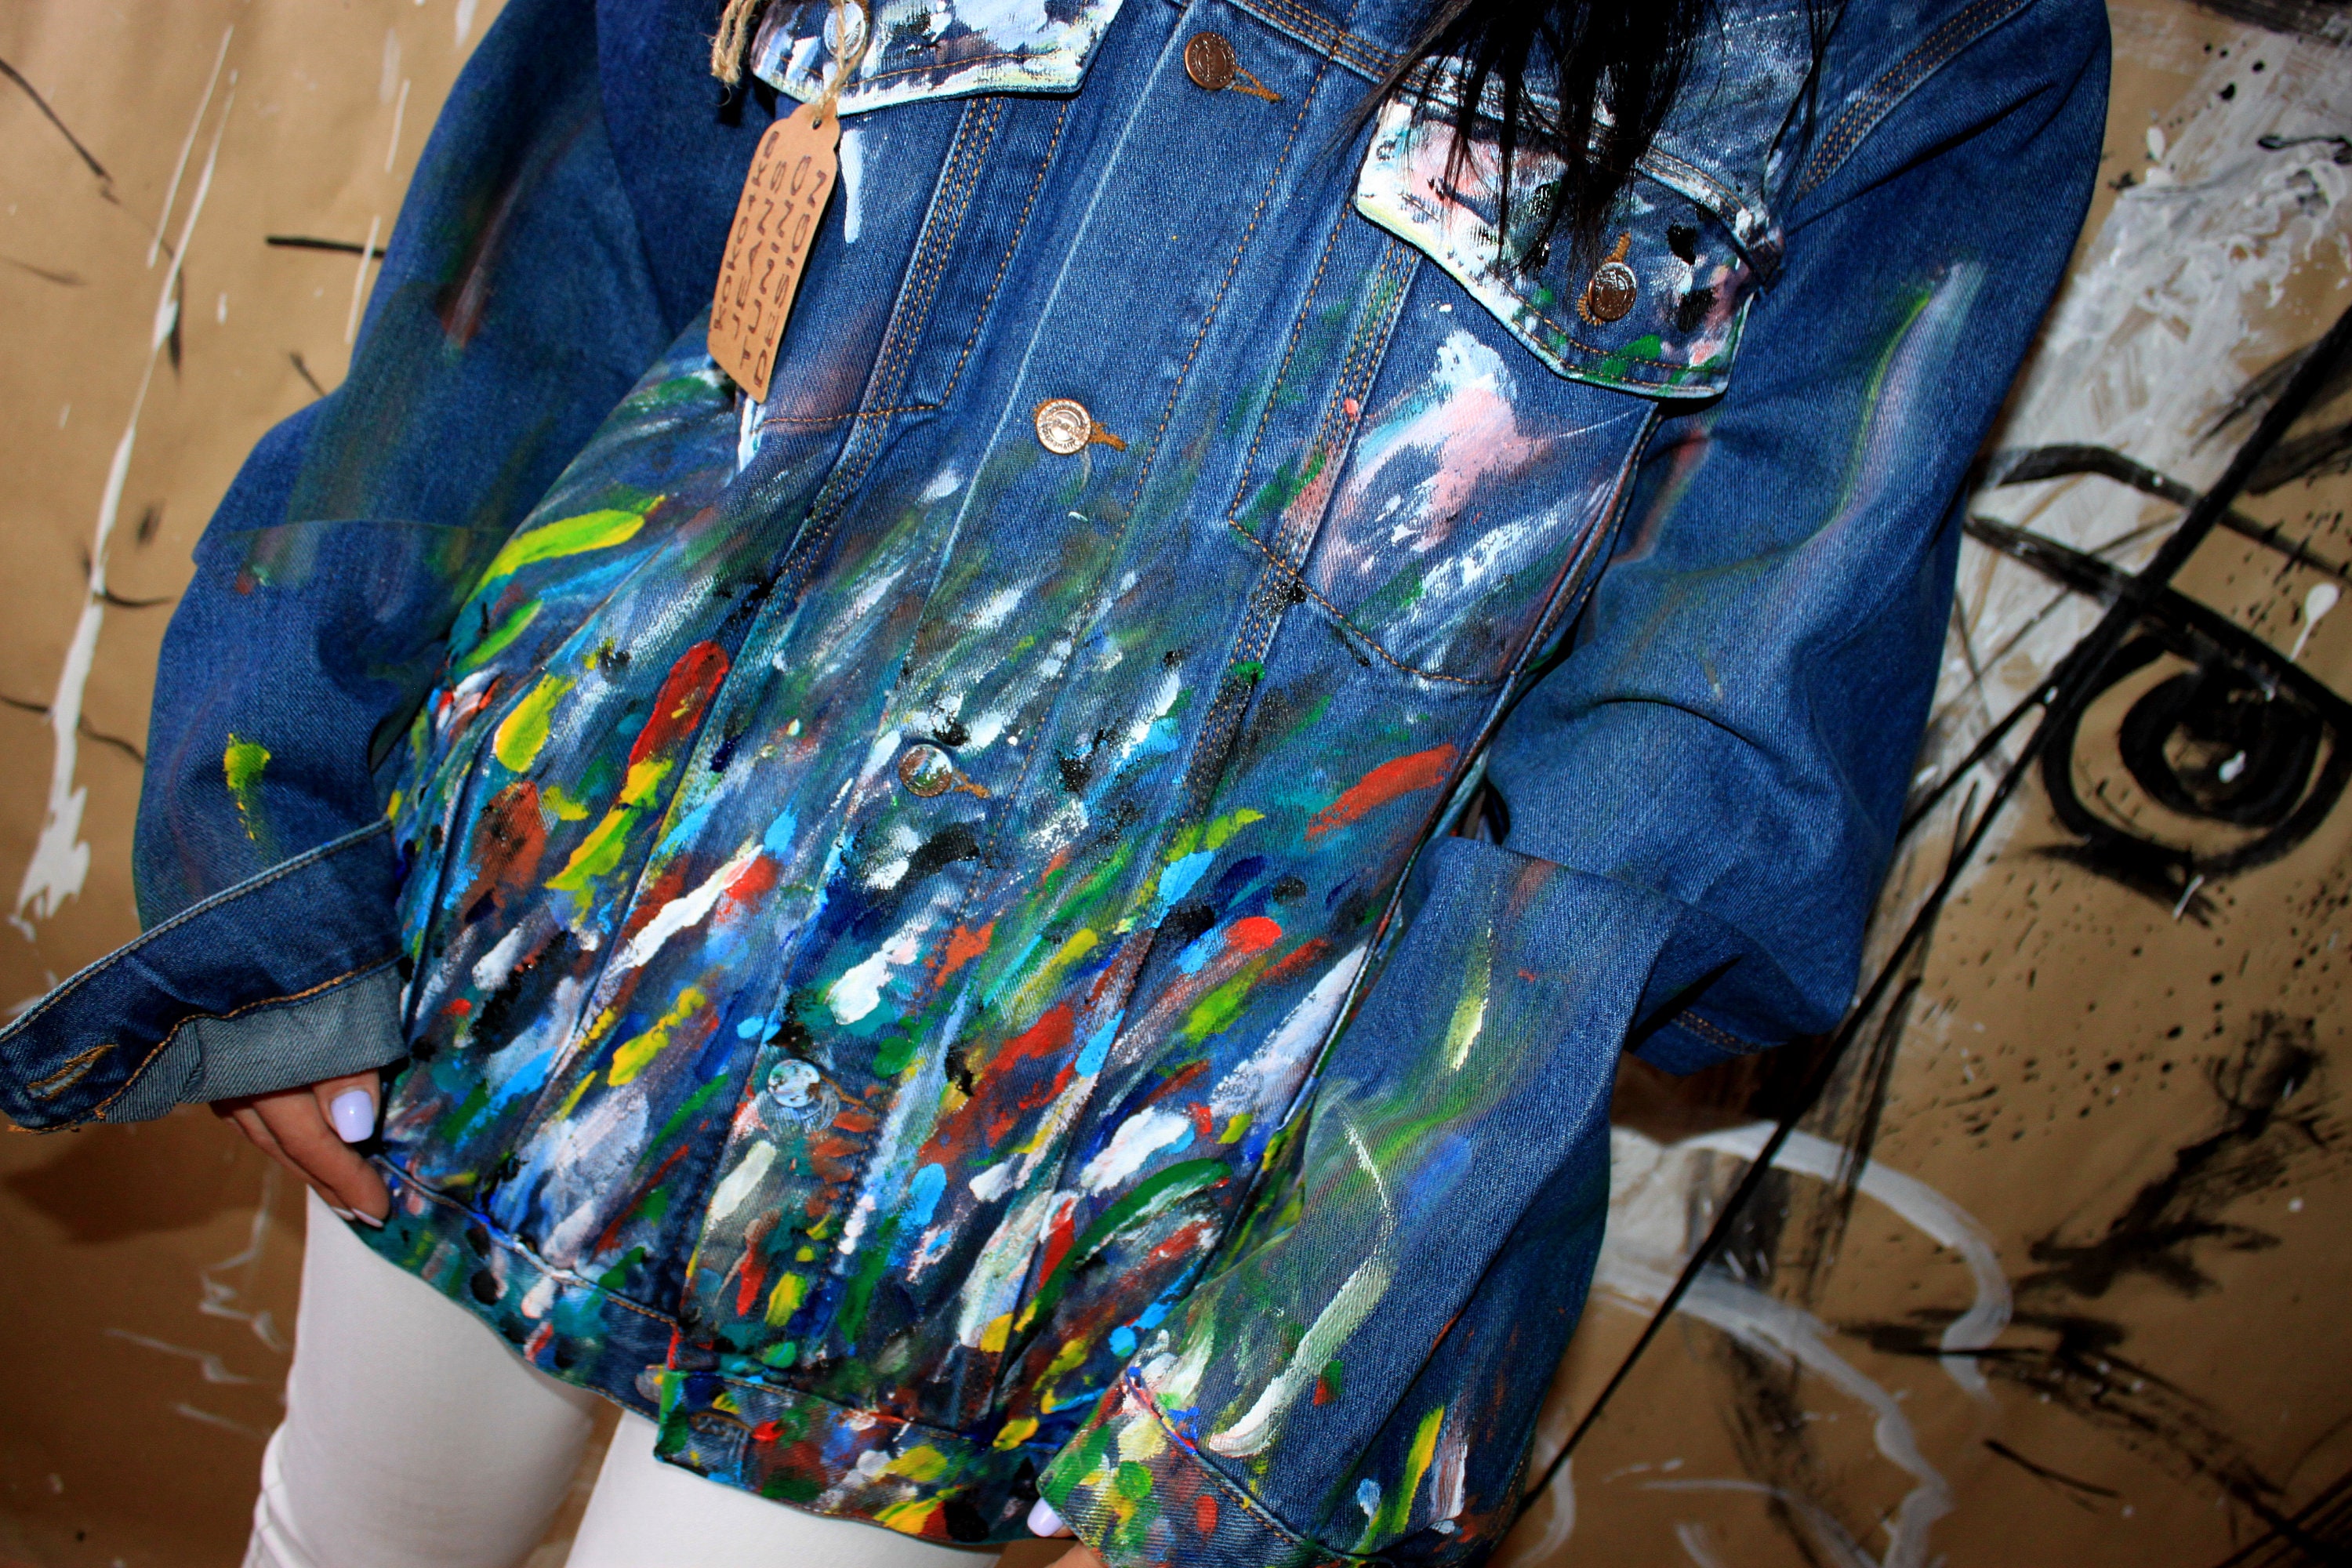 Hand Painted Denim Jacket With Painting Jacket With Art Work on It Art on  Denim Denim Jean Jacket With Art Pop-art Family Look Paint Jacket - Etsy